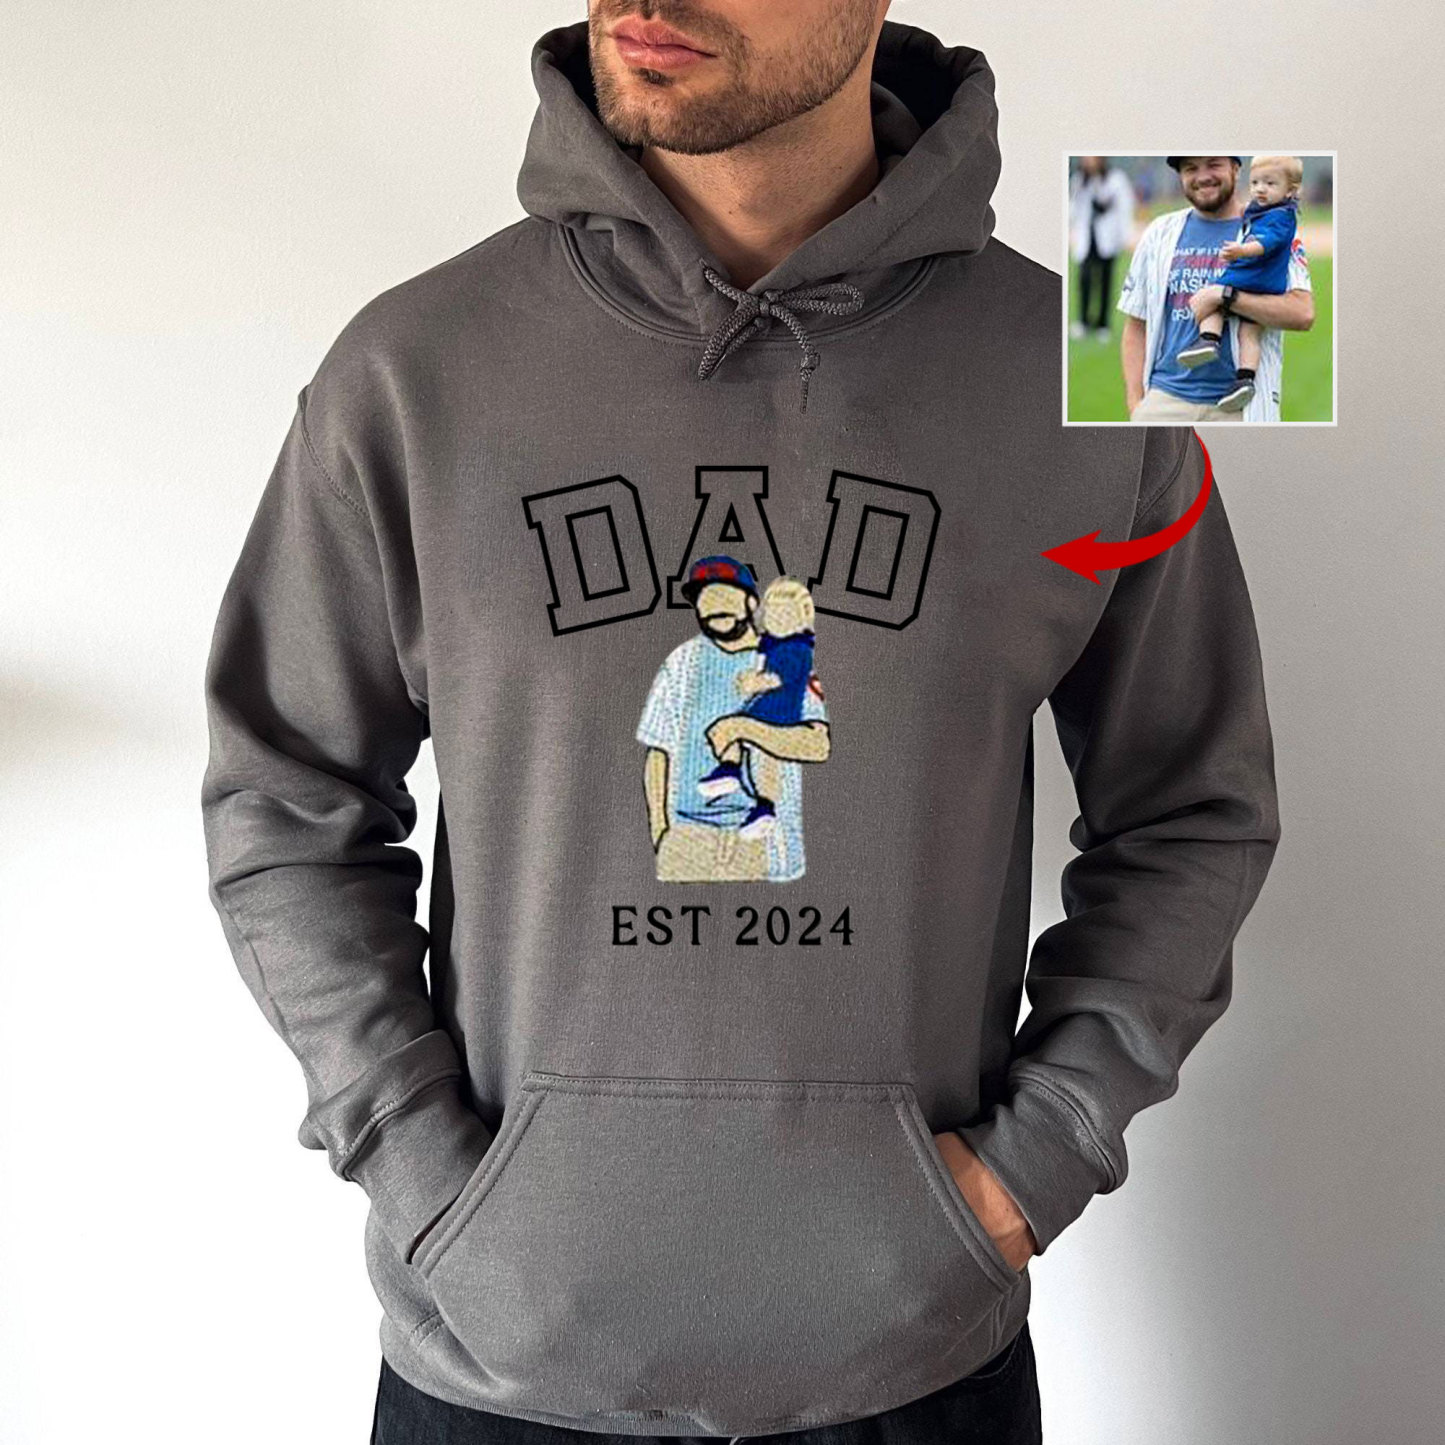 【Father‘s day Sale】Custom Embroidered Sweatshirt with Name and Photo Portrait, Family Gift